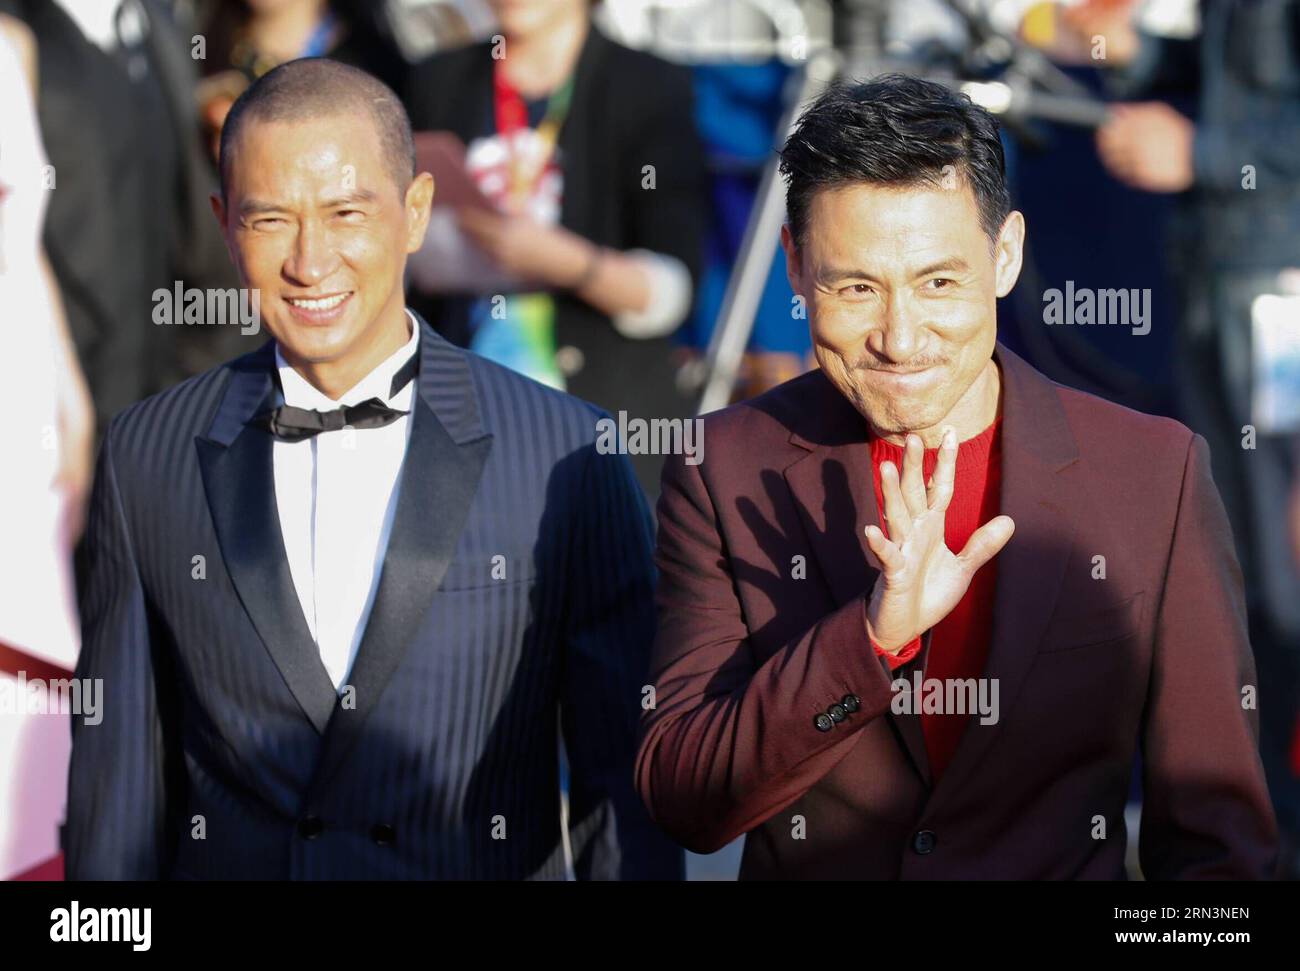 (150423) -- BEIJING, April 23, 2015 -- Actors of the movie Helios Nick Cheung (L) and Jacky Cheung walk the red carpet during the closing ceremony of the fifth Beijing International Film Festival (BJIFF) in Beijing, capital of China, April 23, 2015. The BJIFF closed here on Thursday. ) (mp) CHINA-BEIJING-FILM FESTIVAL-CLOSING (CN) ShenxBohan PUBLICATIONxNOTxINxCHN   Beijing April 23 2015 Actors of The Movie Helios Nick Cheung l and Jacky Cheung Walk The Red Carpet during The CLOSING Ceremony of The Fifth Beijing International Film Festival  in Beijing Capital of China April 23 2015 The  Closed Stock Photo